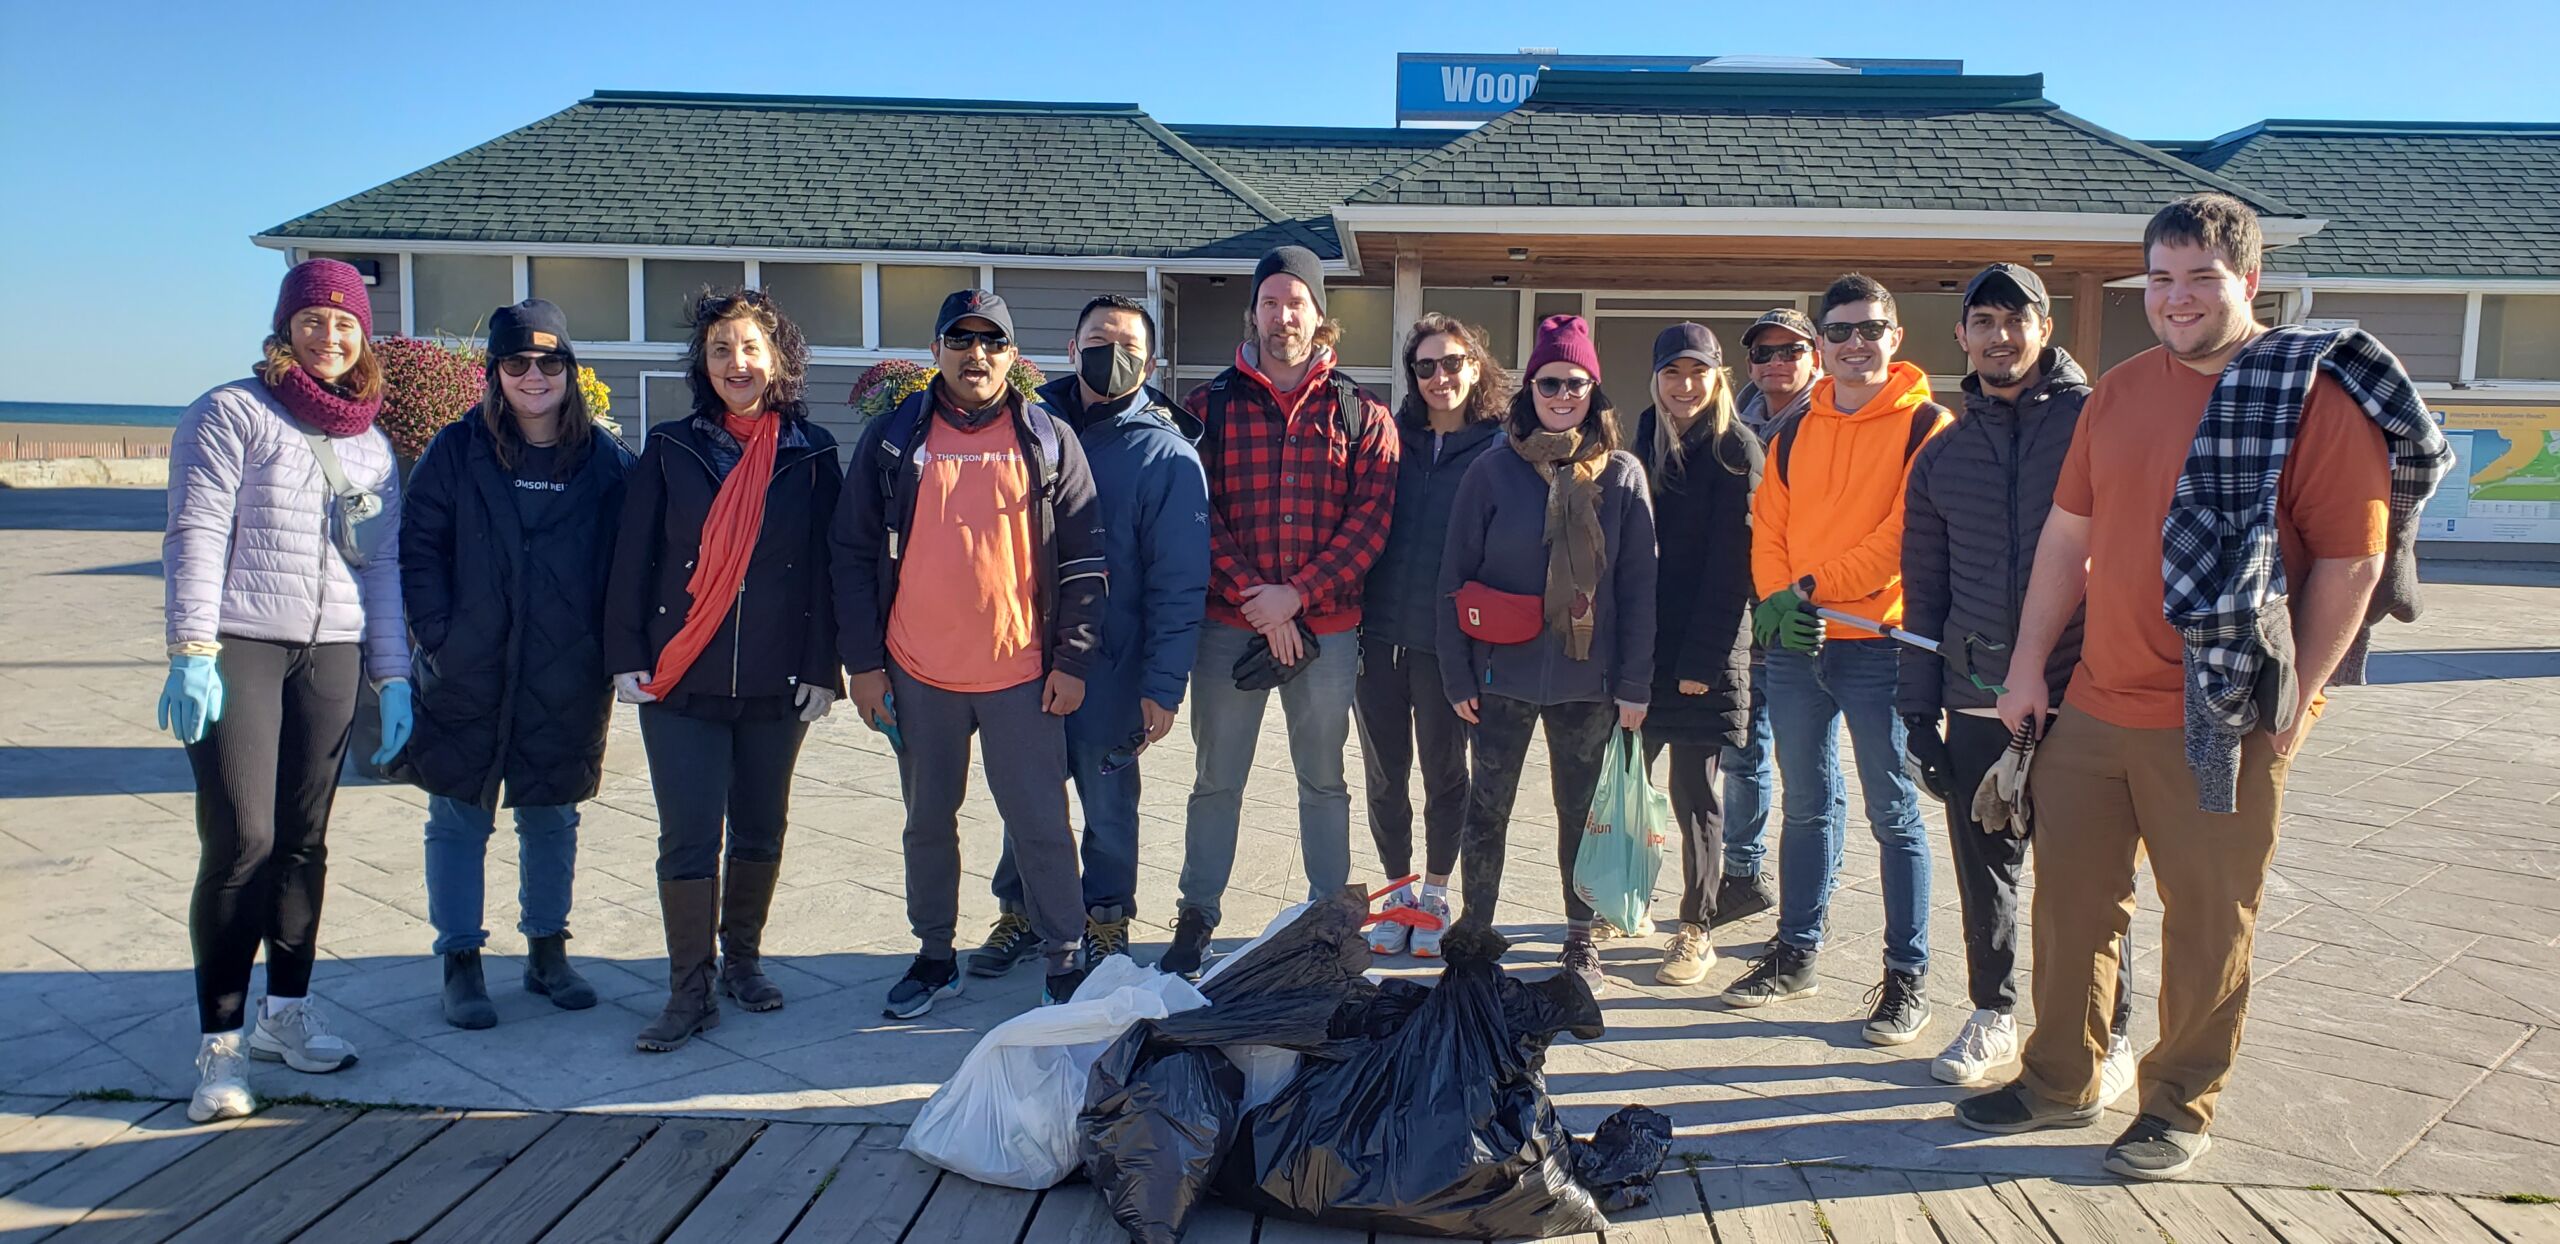 Thomson Reuters teammates in Toronto pose for a group photo while cleaning up a local beach during global volunteer day.